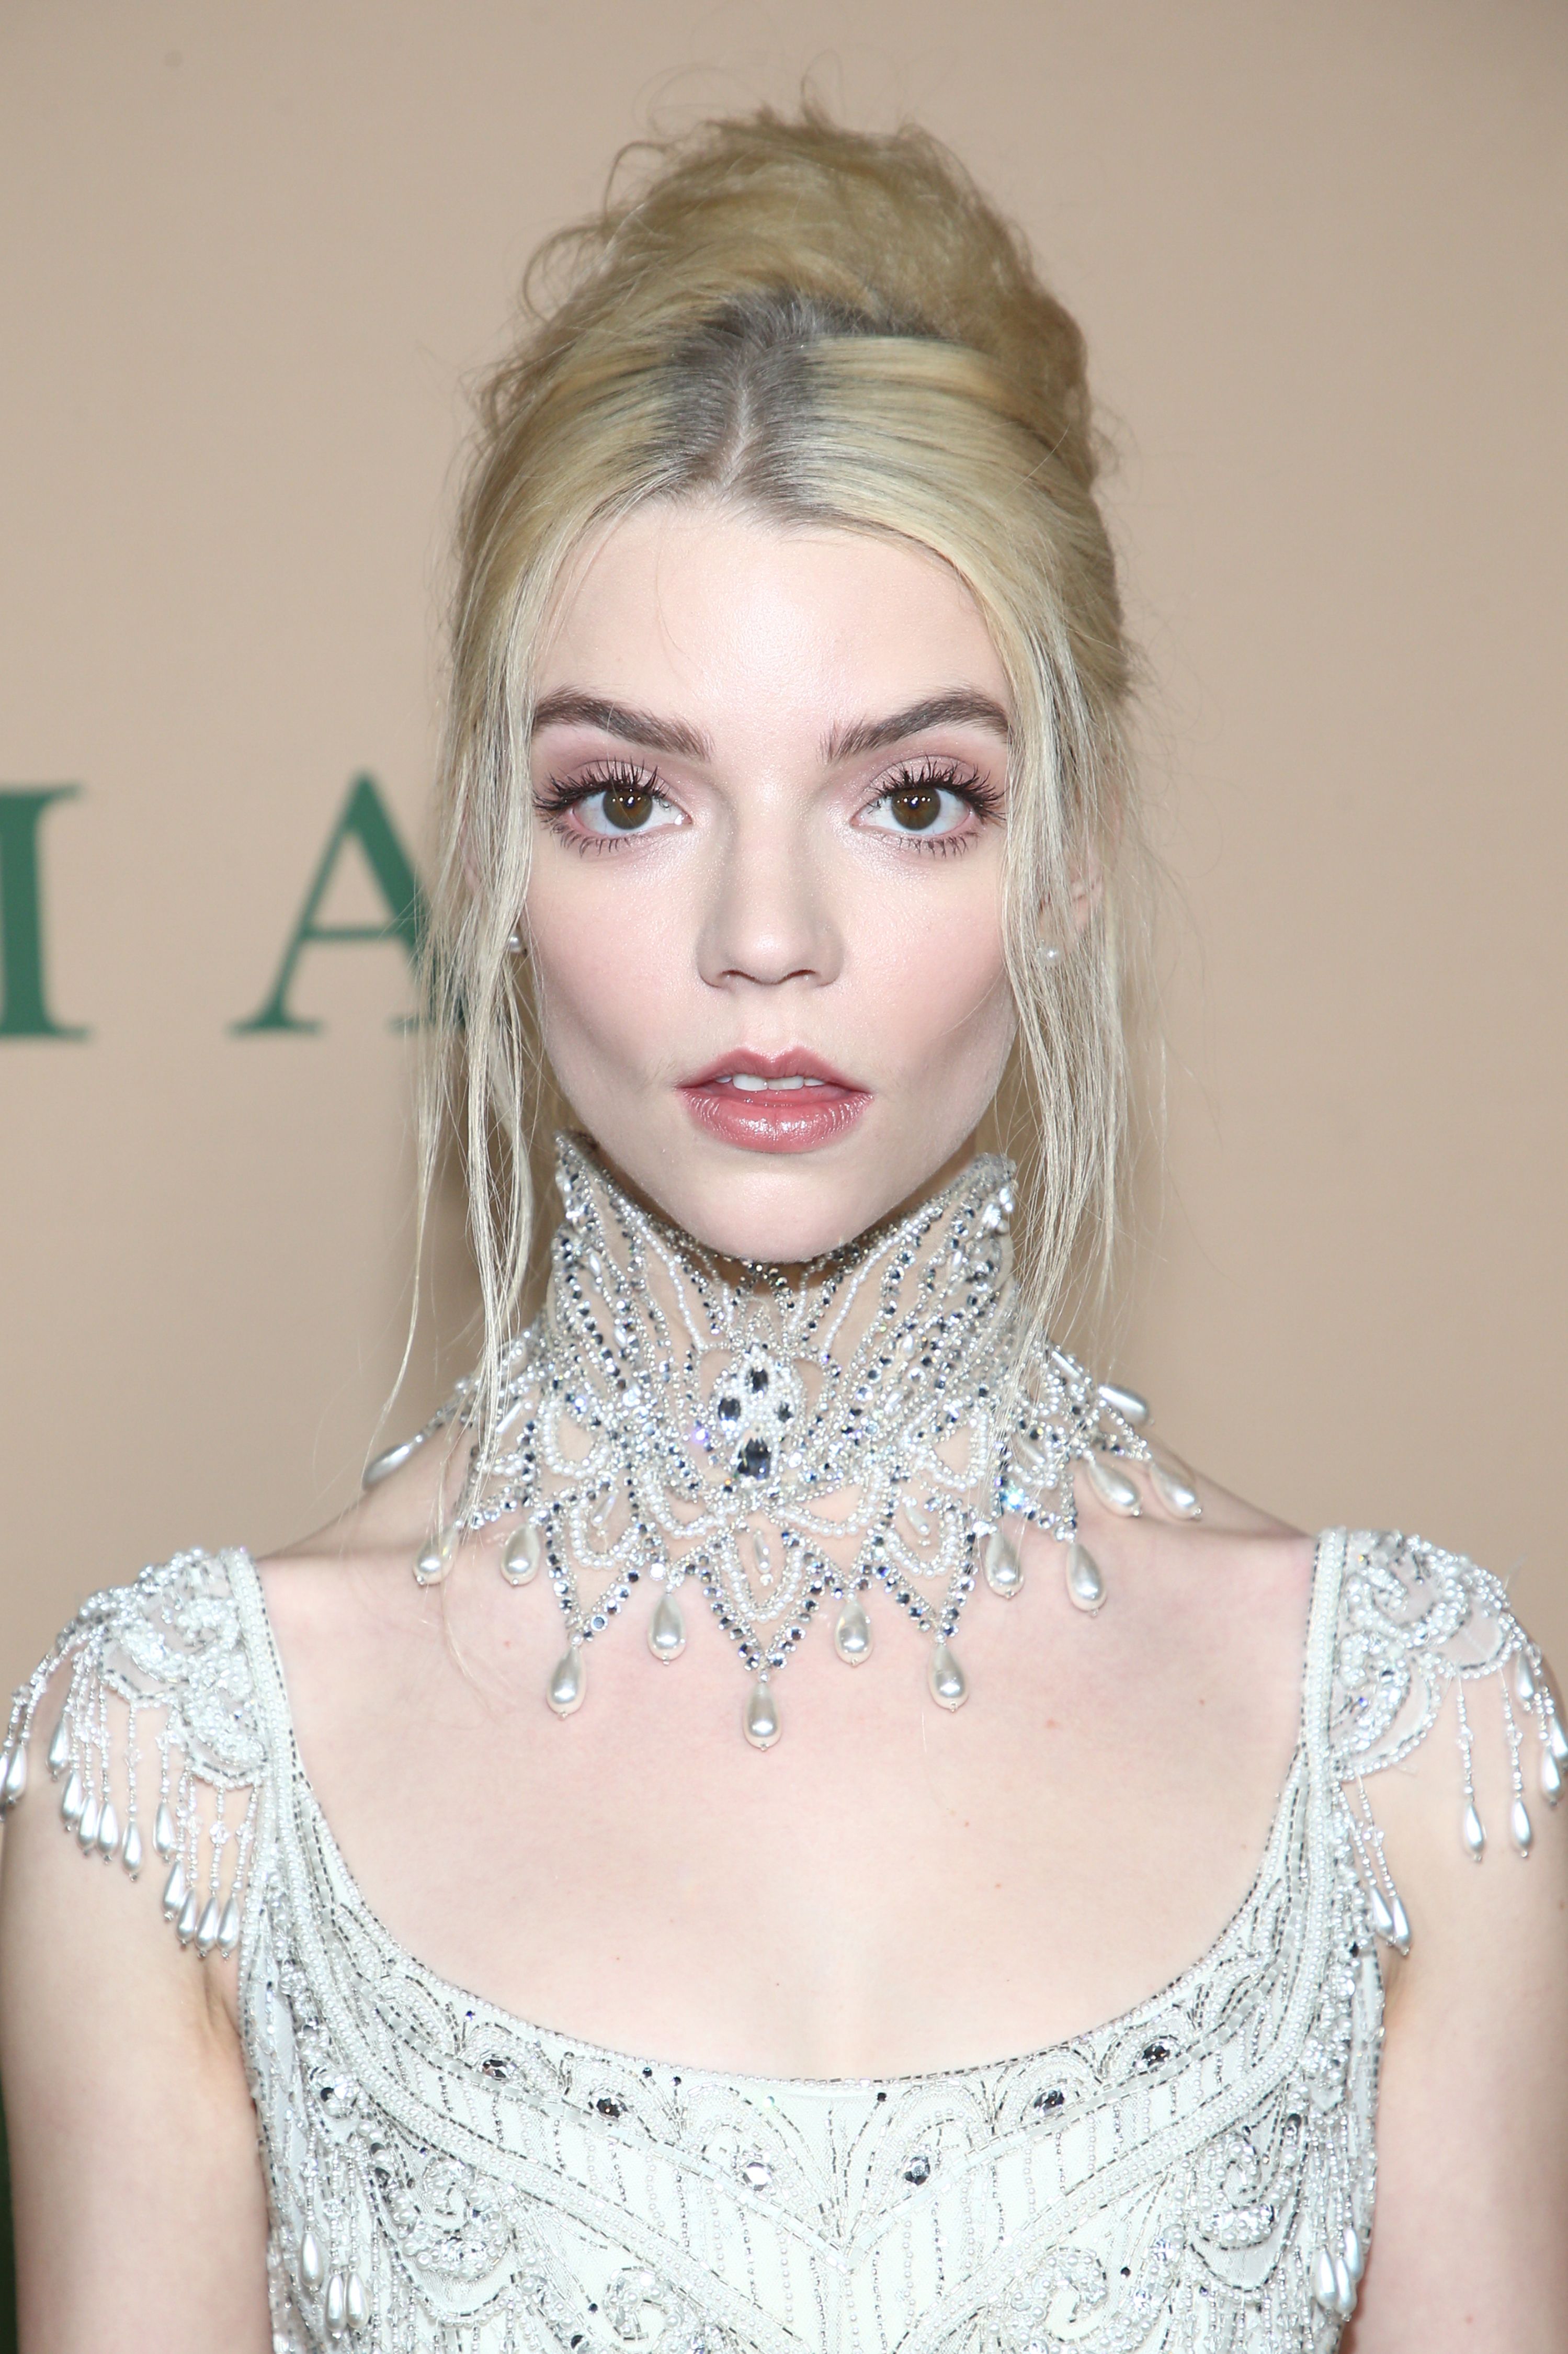 Anya Taylor-Joy ages down for 'The Queen's Gambit' 